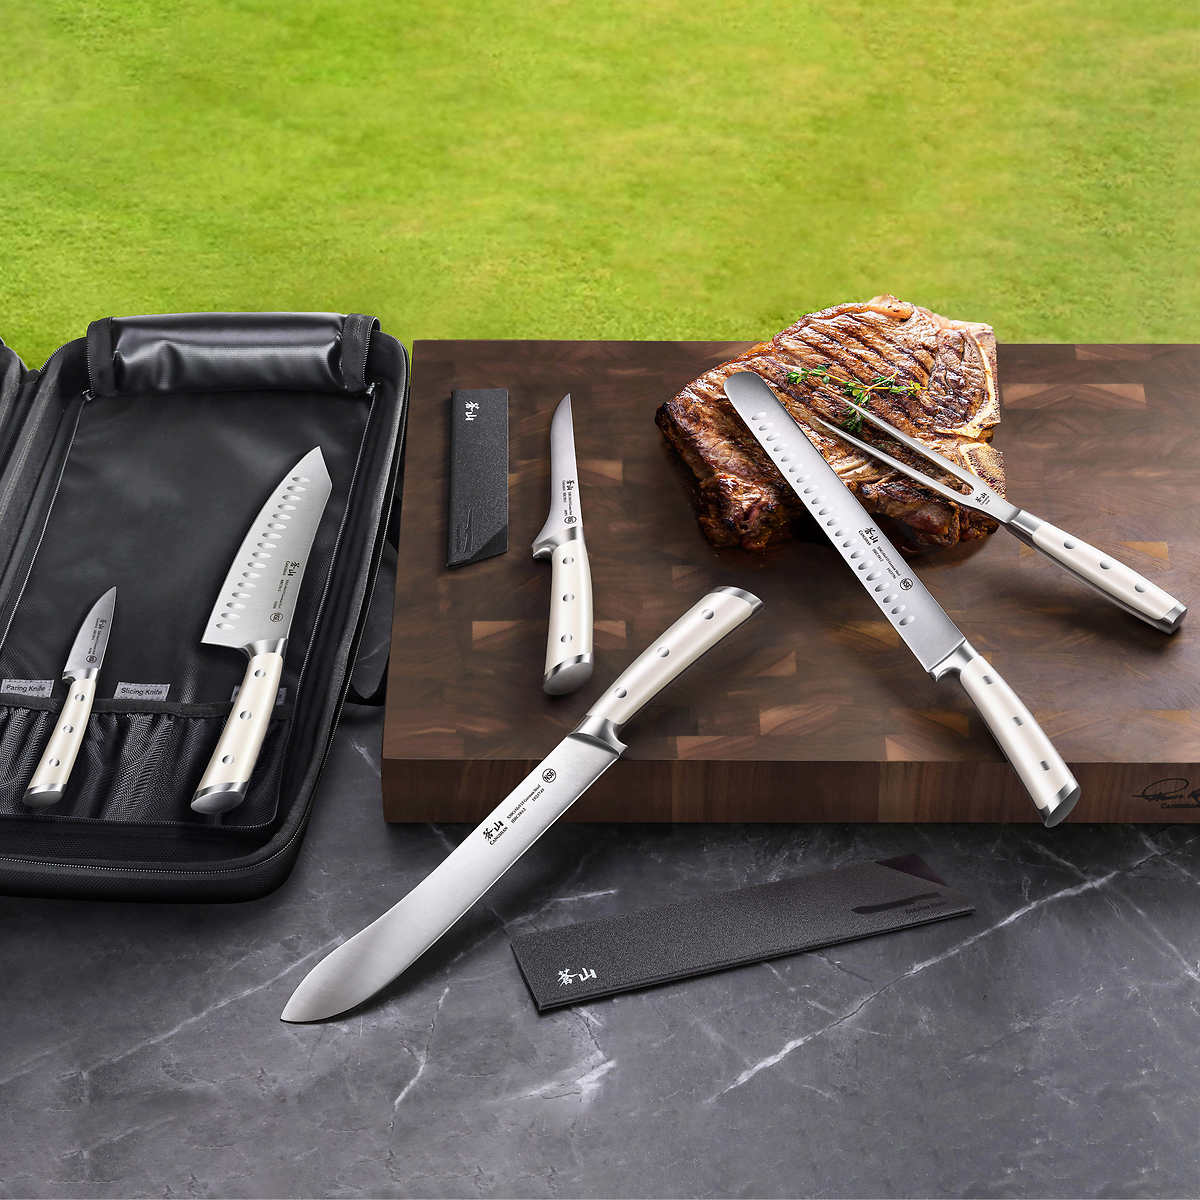 https://theseason.com/image/cache/products/2022/04/cangshan-s-series-german-steel-forged-7piece-bbq-knife-set-white-1295246748-1200x1200.jpg